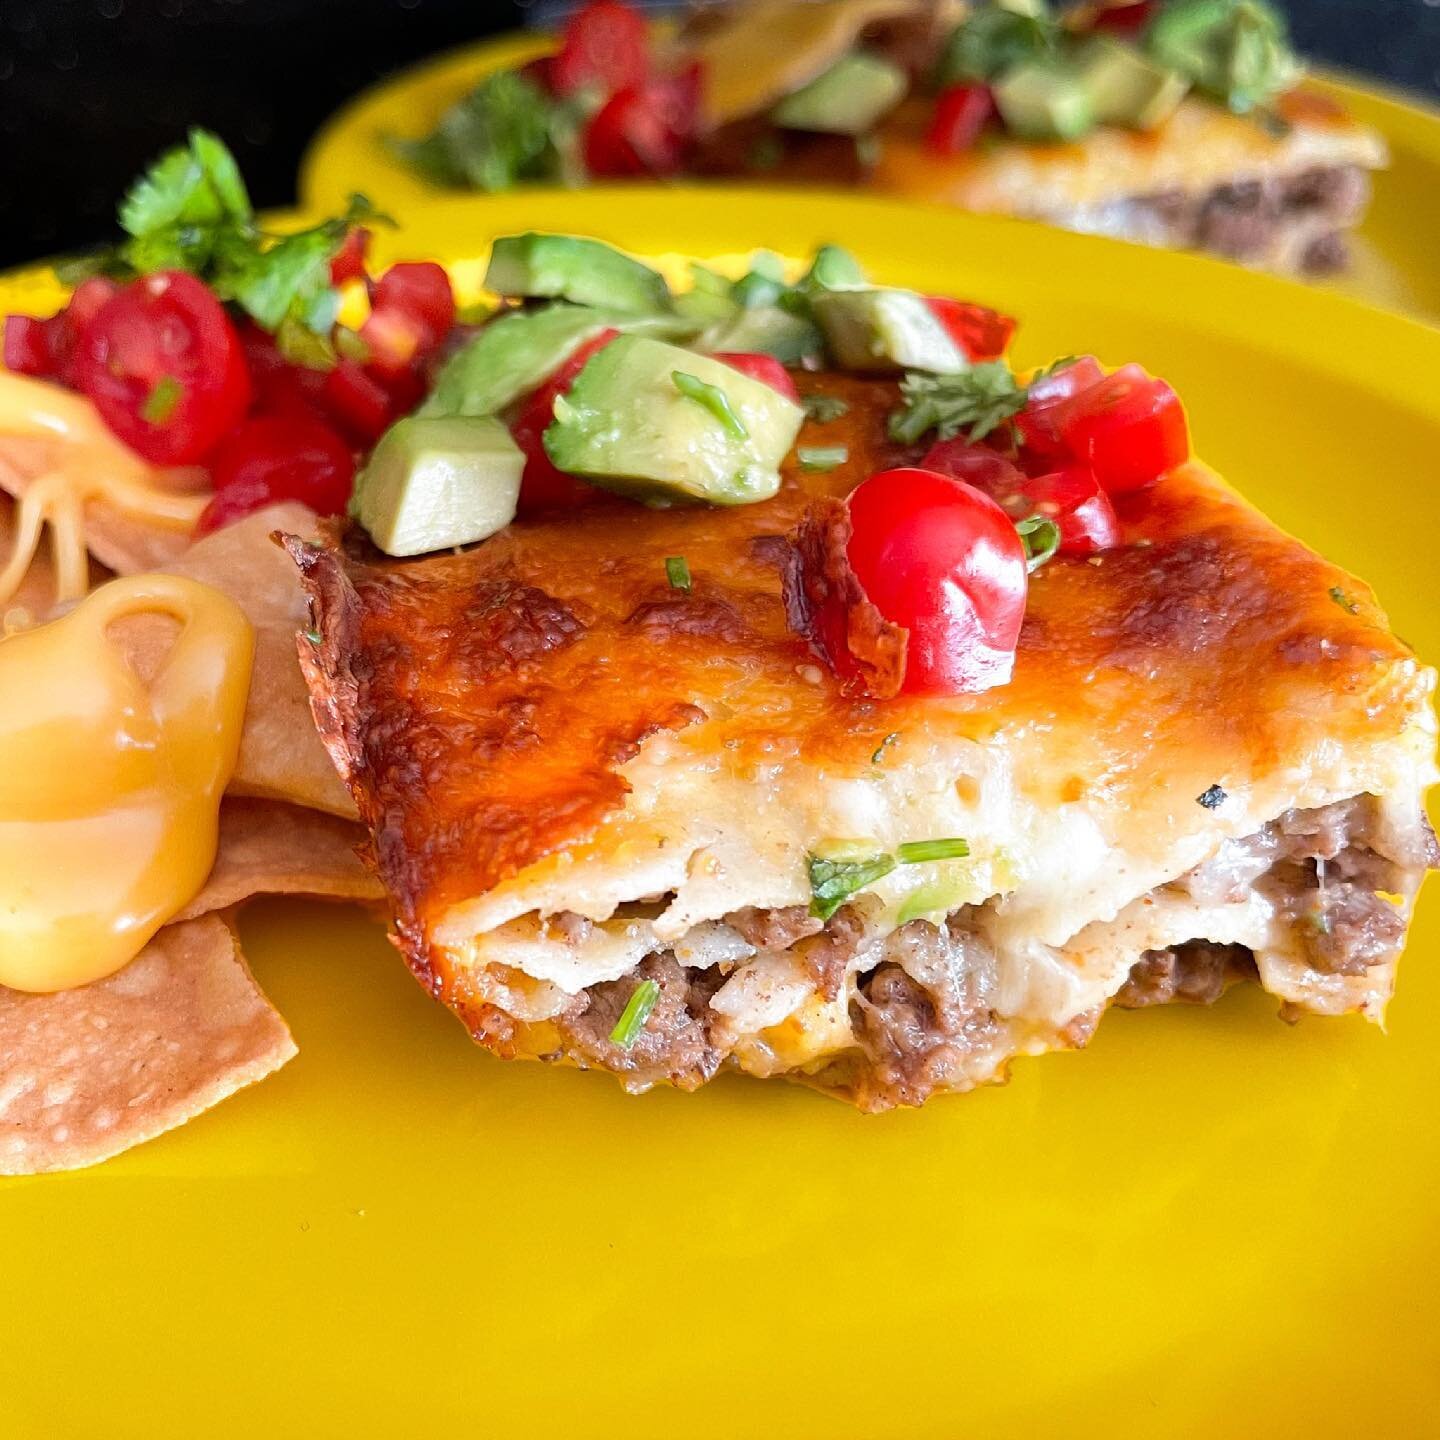 Taco lasagna / Taco enchiladas 
Whatever you want to call it, these were amazing!!! 
I love doing a combo of ground pork and ground beef to get the meats juicy and flavorful.
Seasoned ground meat with diced onions, minced garlic, ground cumin, salt, 